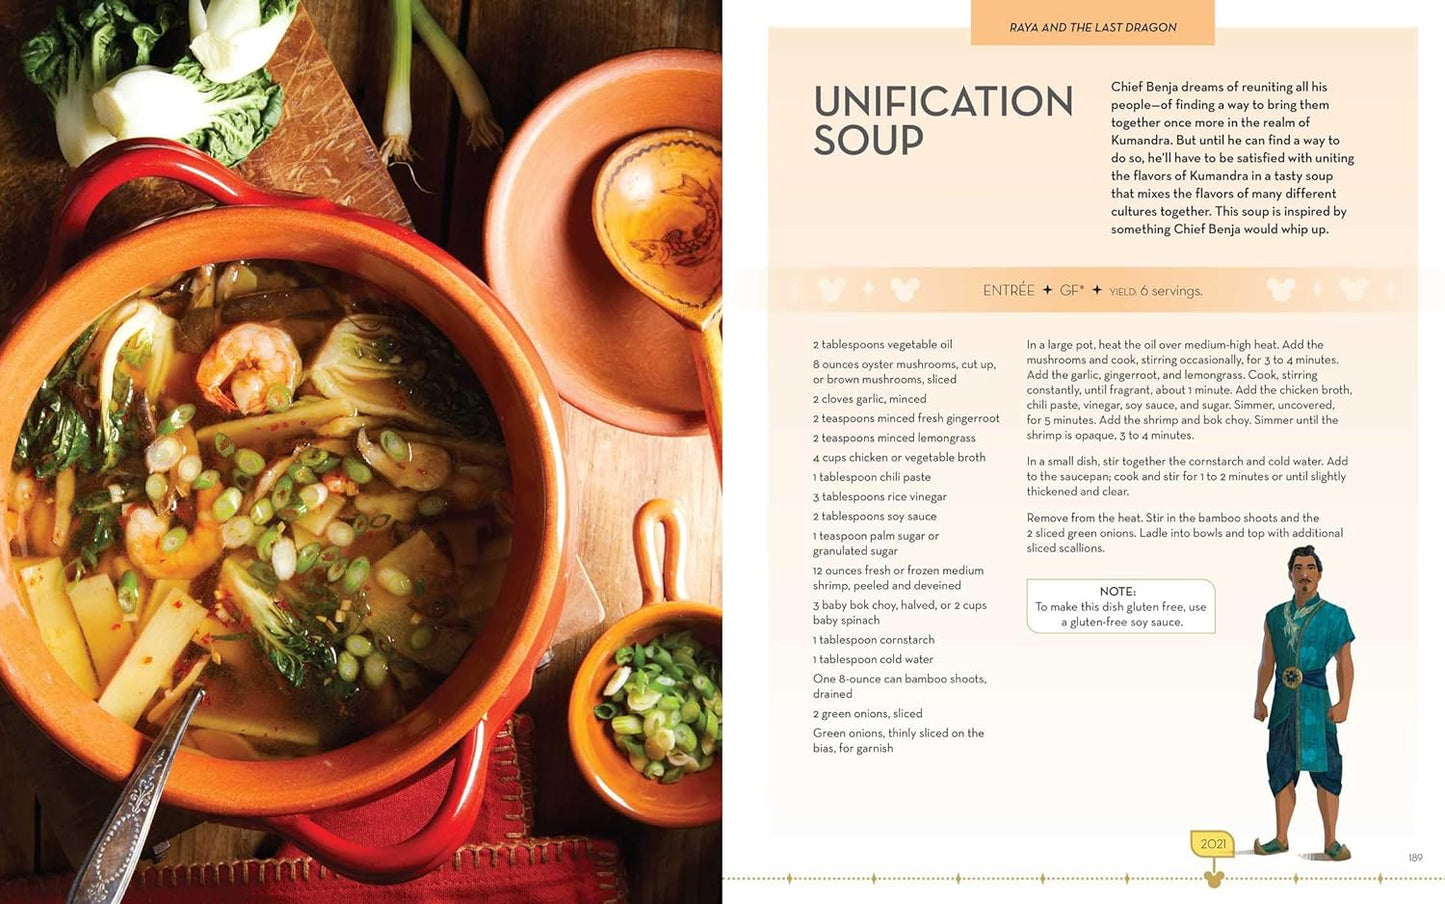 A two-page spread from the book. On the left is a bowl of vegetable soup, next to a cup of scallions, and a wooden bowl with a spoon. On the right is a recipe for unification soup.